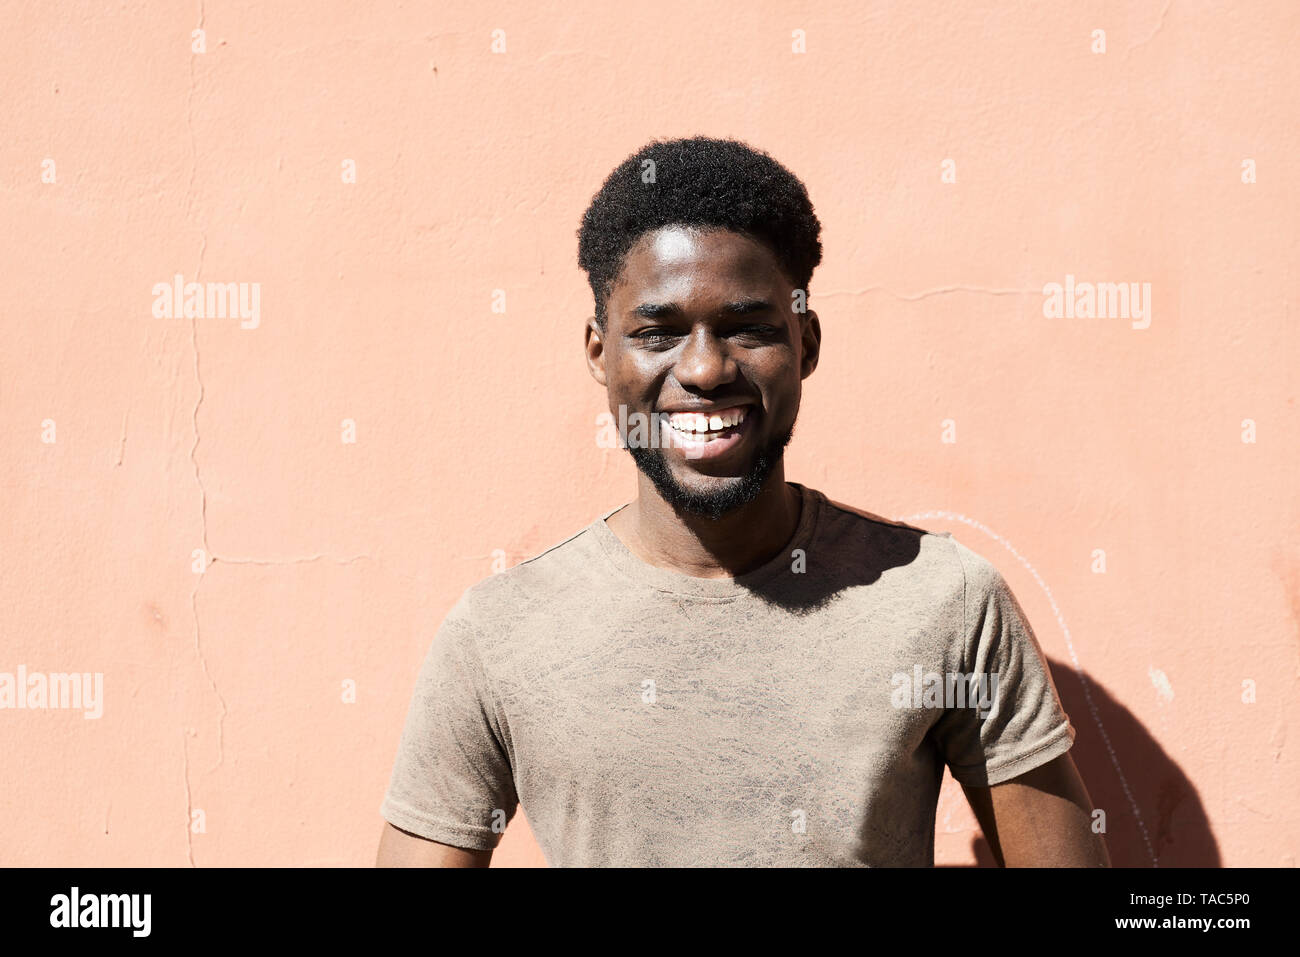 Portrait of a young man laughing outdoors Banque D'Images